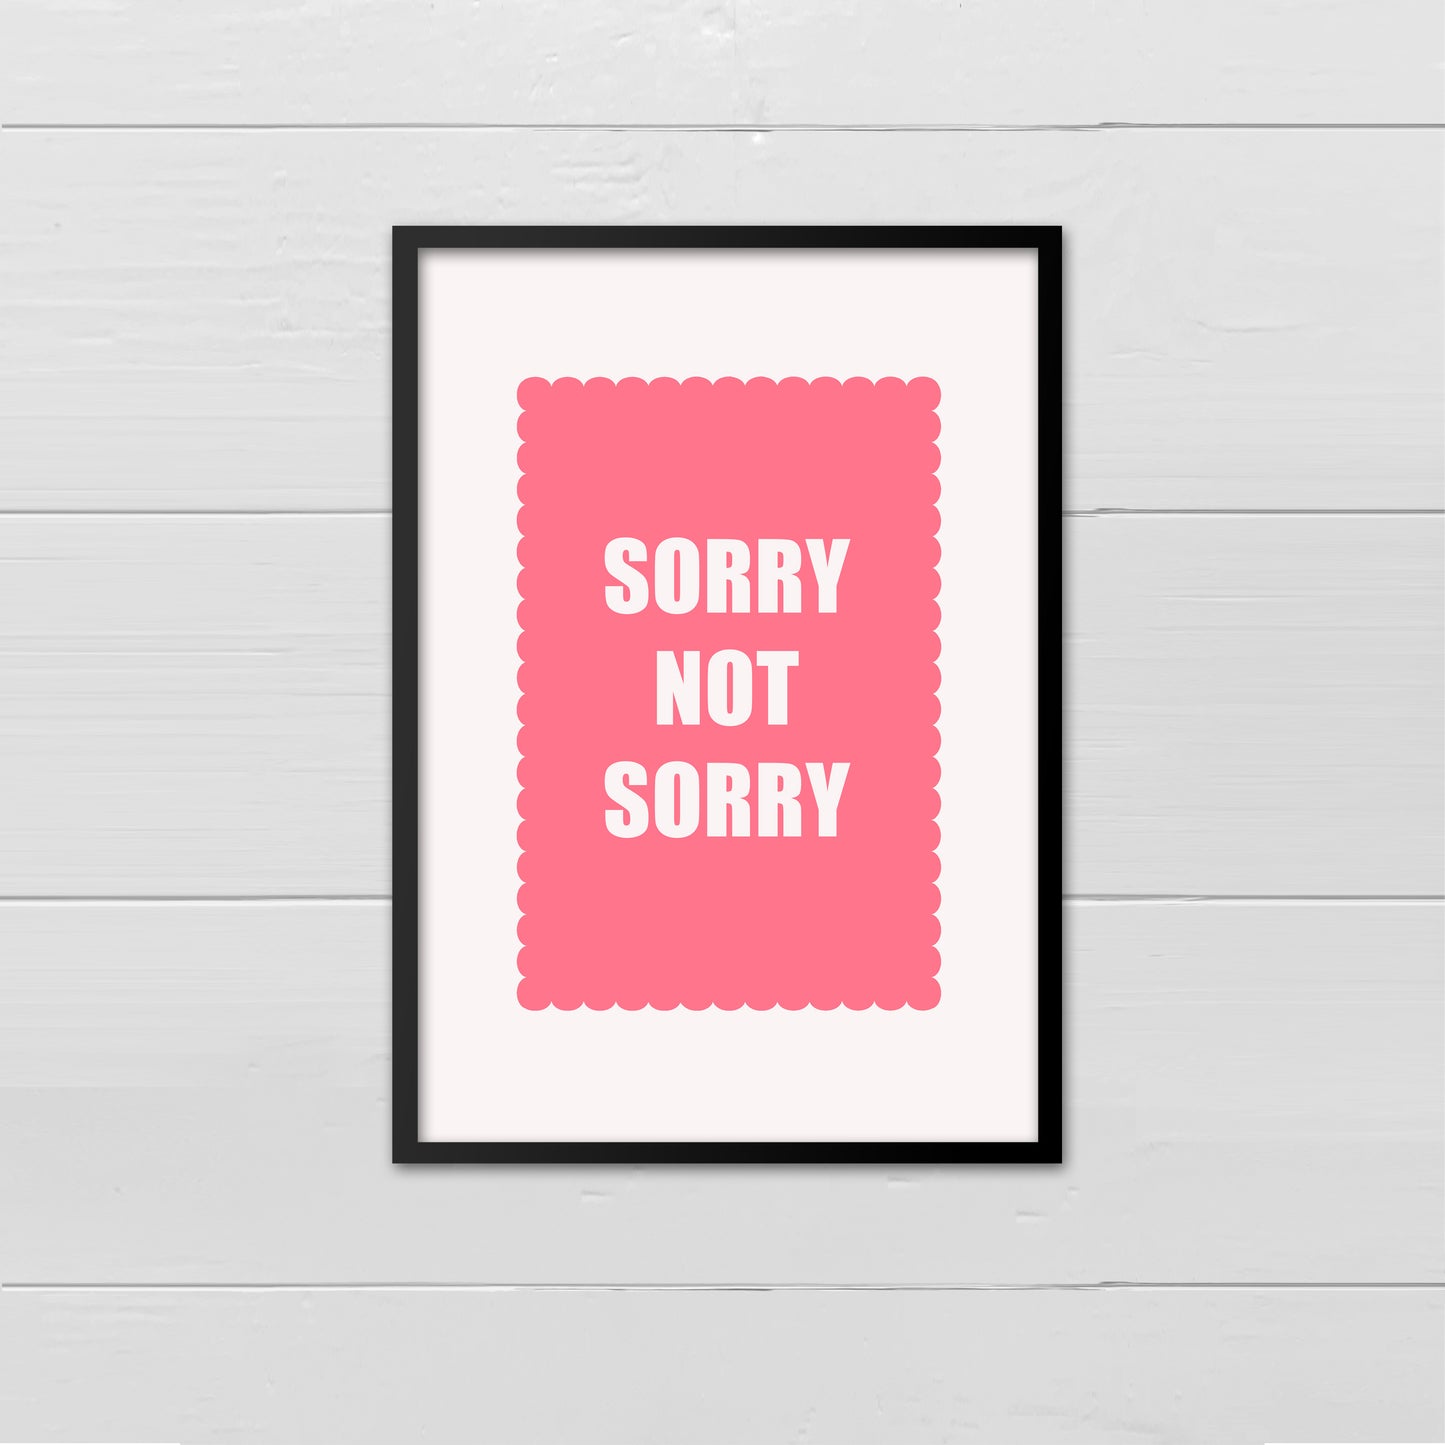 Sorry Not Sorry - cream on pink